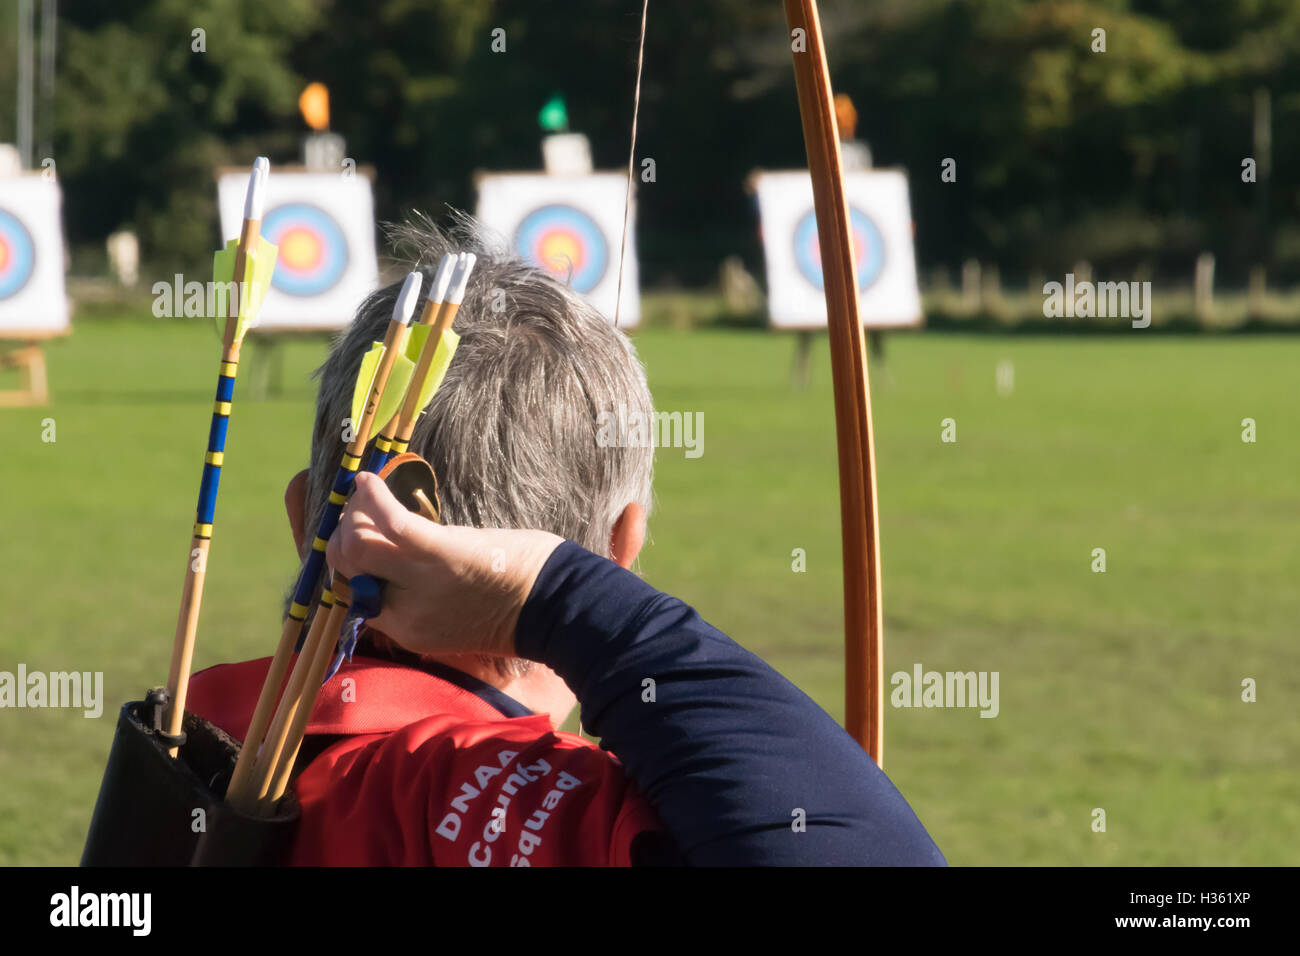 Archer retrieving arrow from back quiver at archery competition Stock Photo